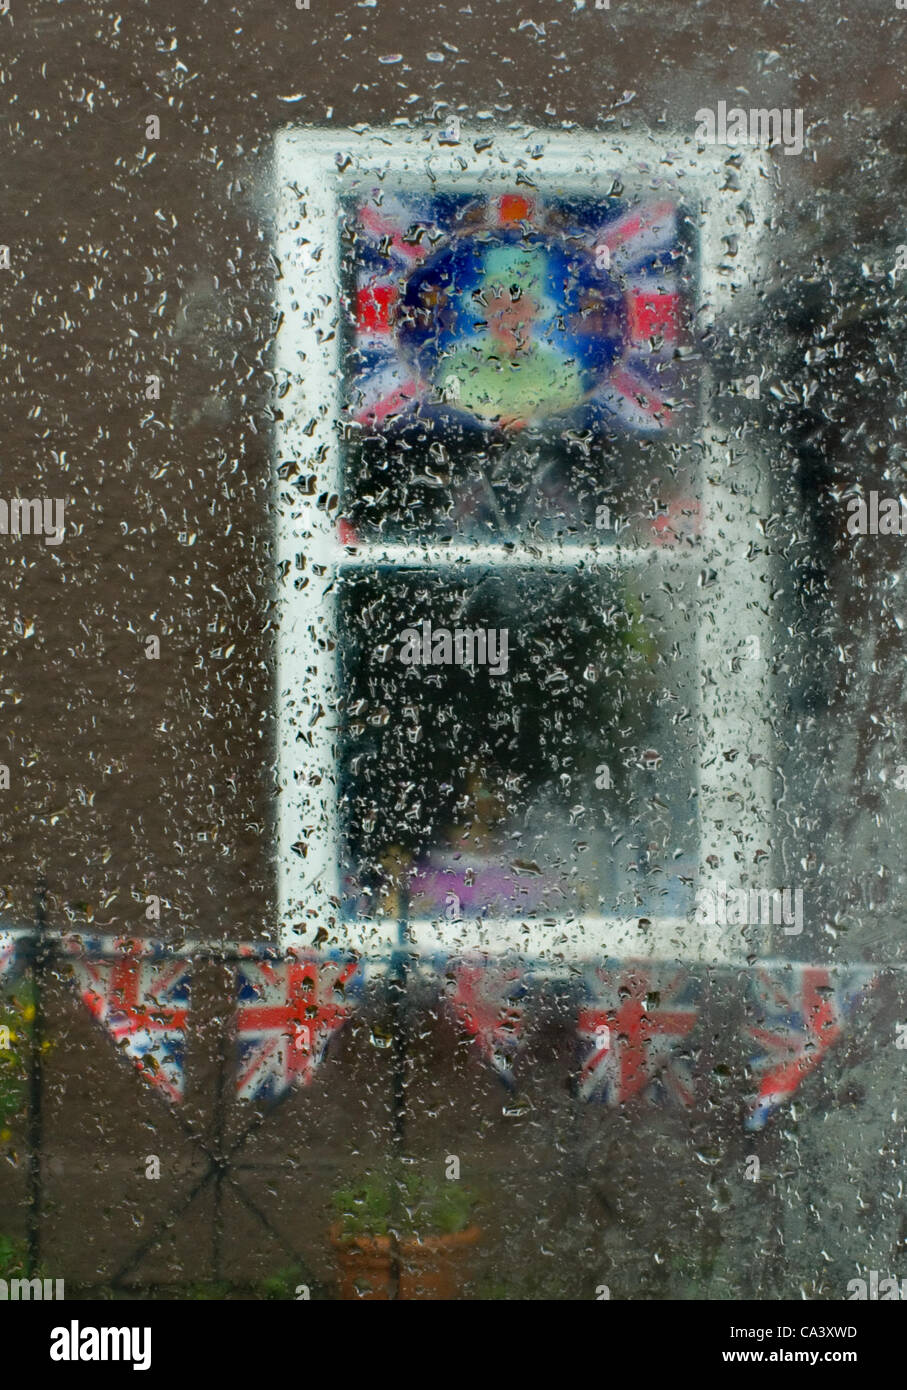 Rain dampens UK celebrations for the Queens Diamond Jubilee. Despite the poor weather thousands made the most of the British weather and would not let the rain spoil the party. , . Stock Photo